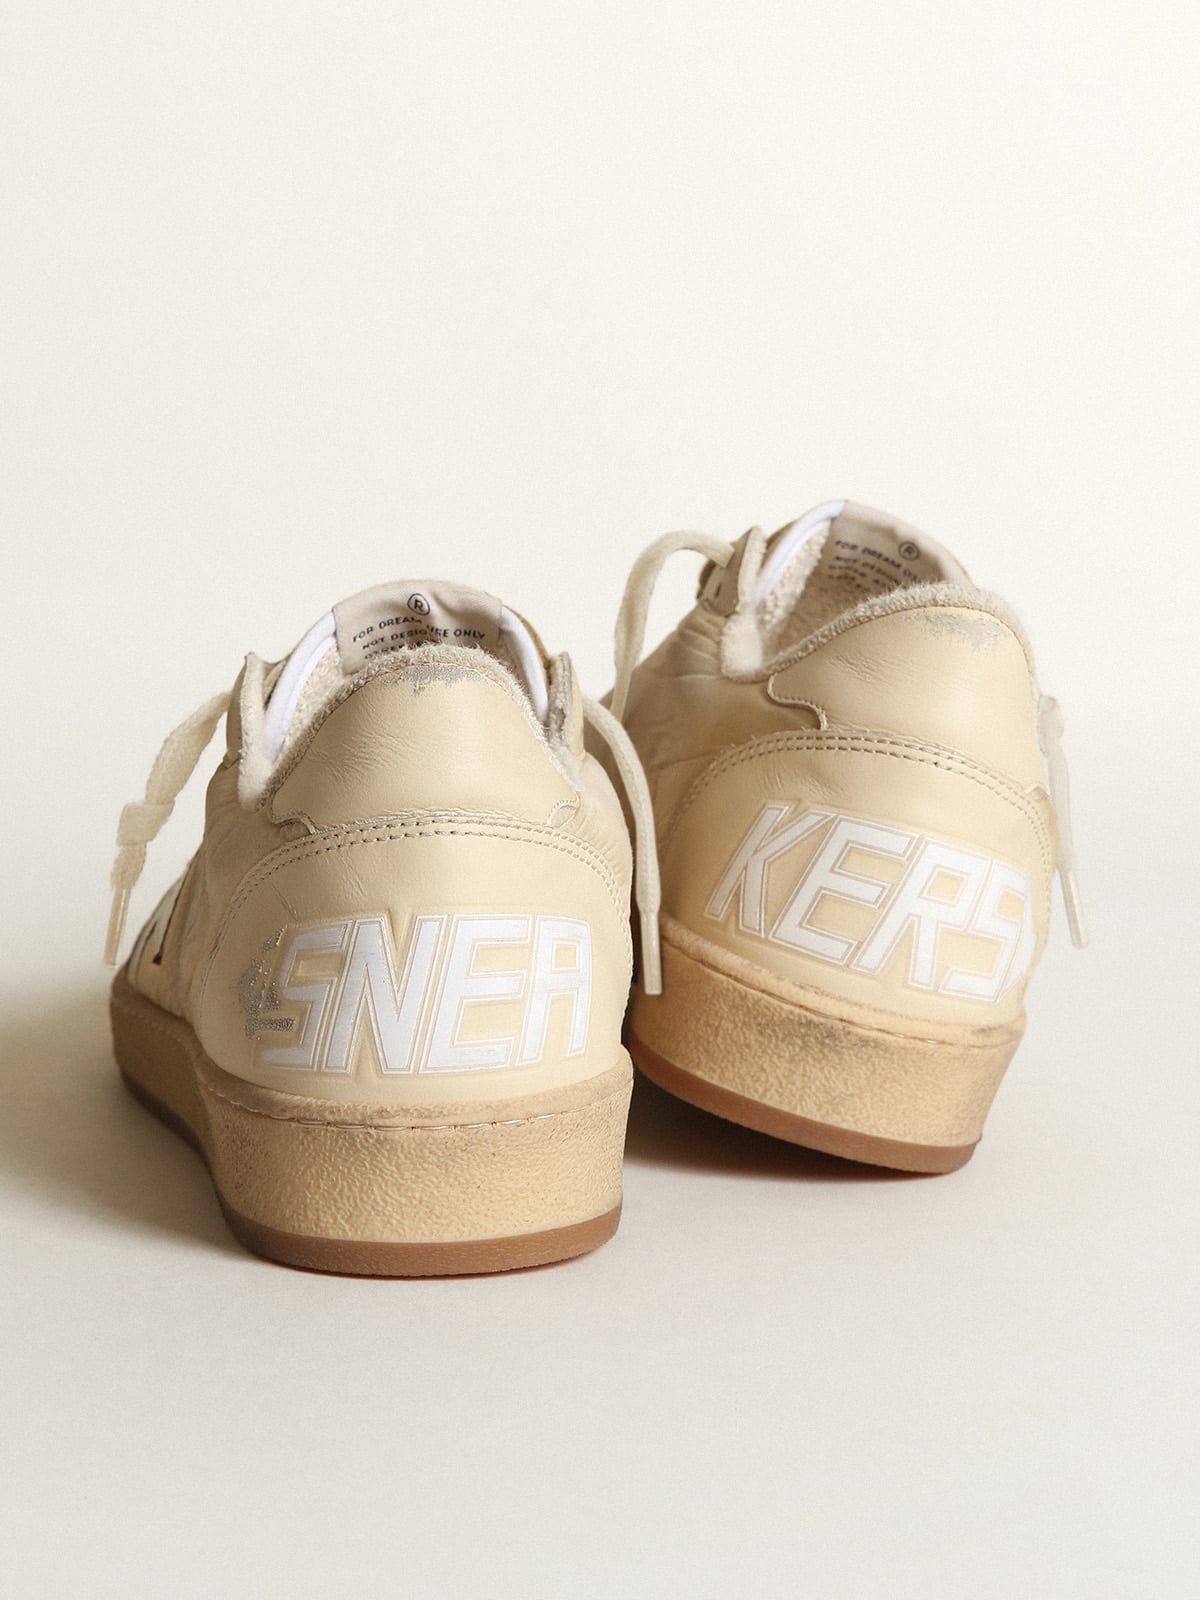 Golden Goose - Men’s Ball Star sneakers in milk-white nylon with white leather star and milk-white leather heel tab in 